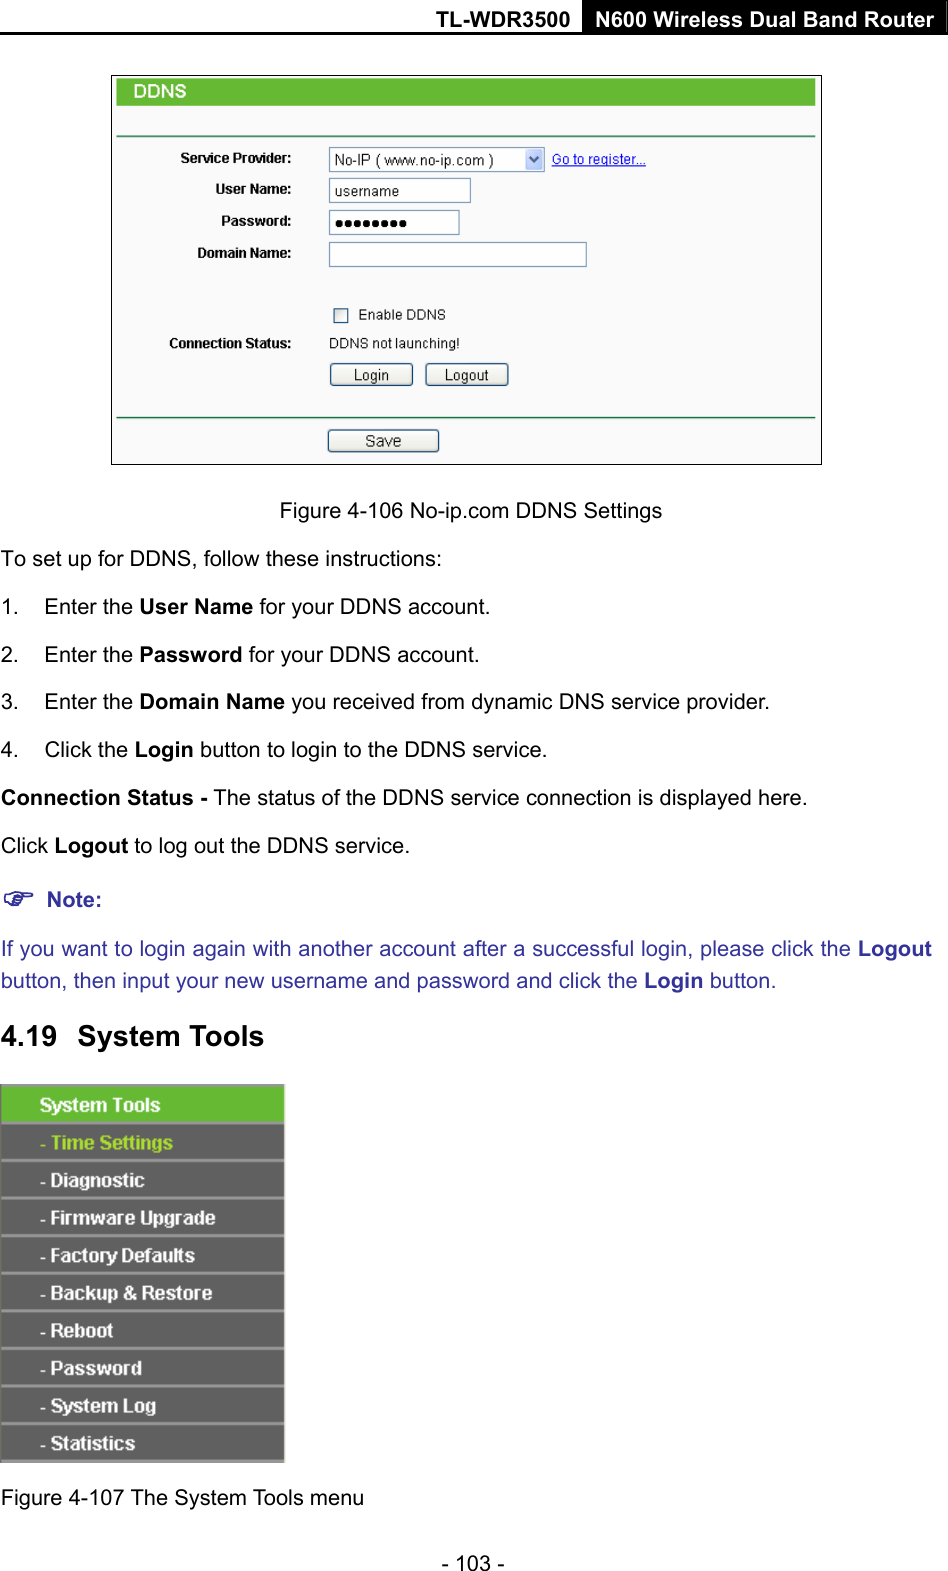 TL-WDR3500 N600 Wireless Dual Band Router - 103 -  Figure 4-106 No-ip.com DDNS Settings  der.   ce connection is displayed here. Logout to log out the DDNS service. ick the Logout ername and password and click the Login button. 4.19  System Tools To set up for DDNS, follow these instructions: 1. Enter the User Name for your DDNS account. 2. Enter the Password for your DDNS account.   3. Enter the Domain Name you received from dynamic DNS service provi4. Click the Login button to login to the DDNS service.   Connection Status - The status of the DDNS serviClick  Note: If you want to login again with another account after a successful login, please clbutton, then input your new us Figure 4-107 The System Tools menu 